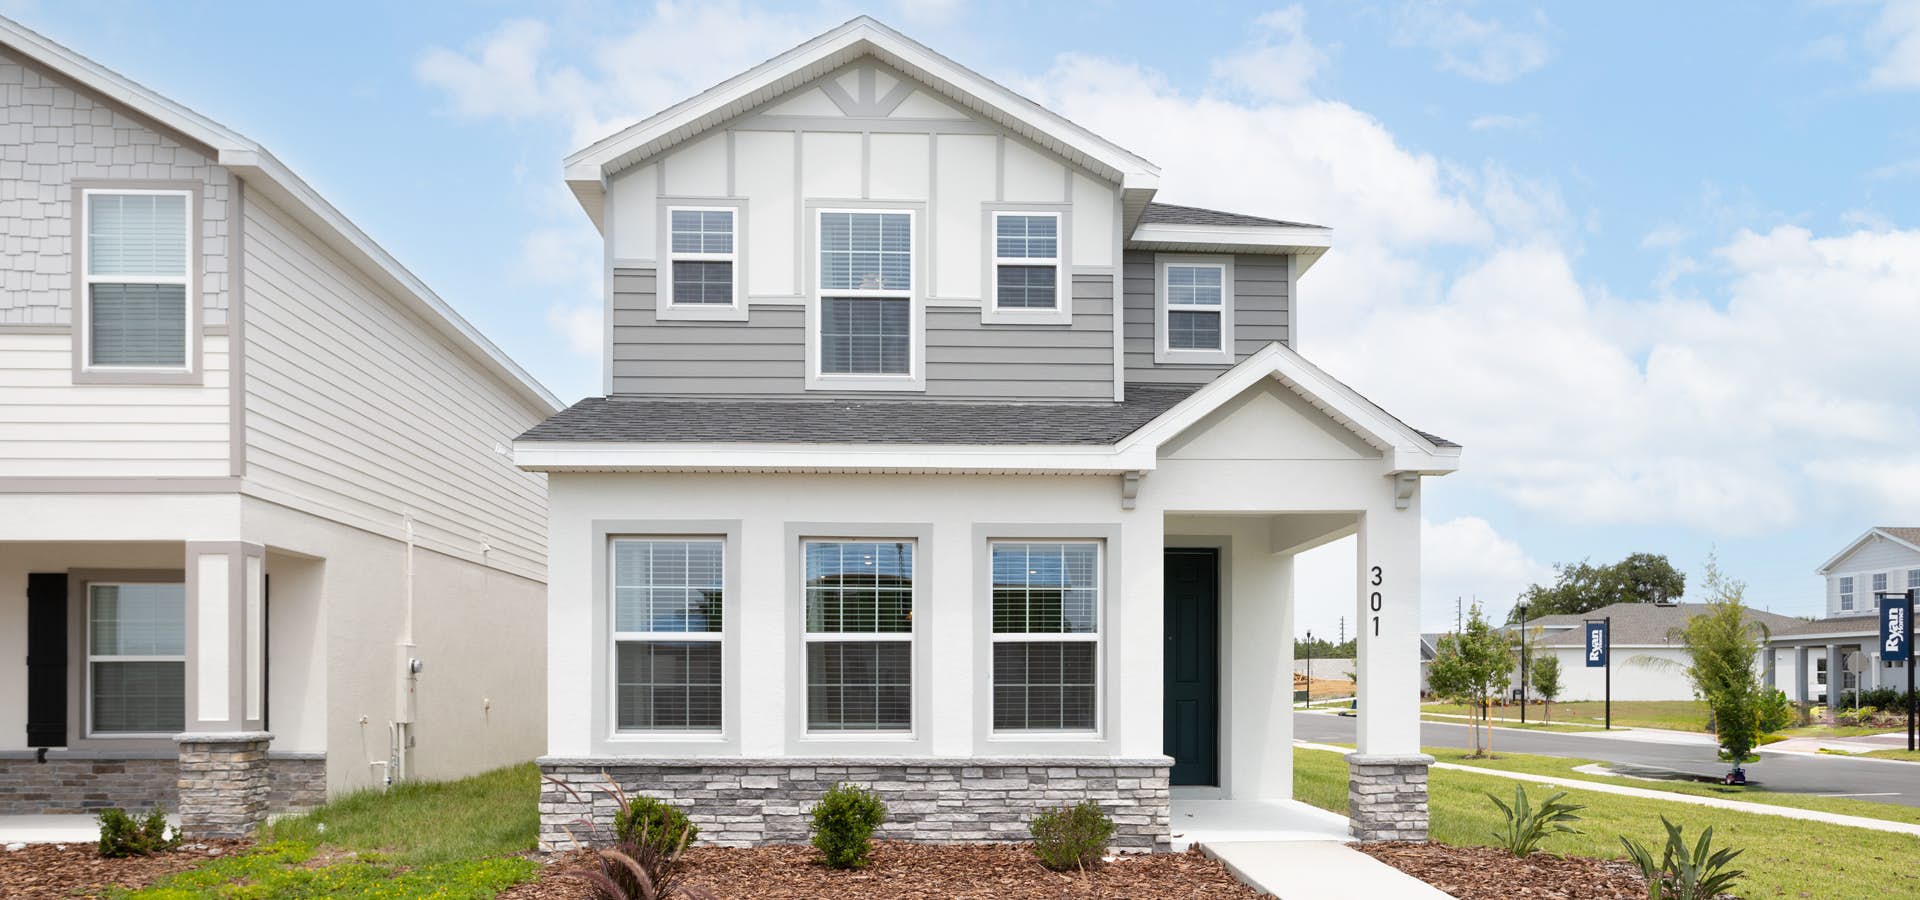 Bungalow homes at The Crossings in St. Cloud, FL offer beautiful curb appeal